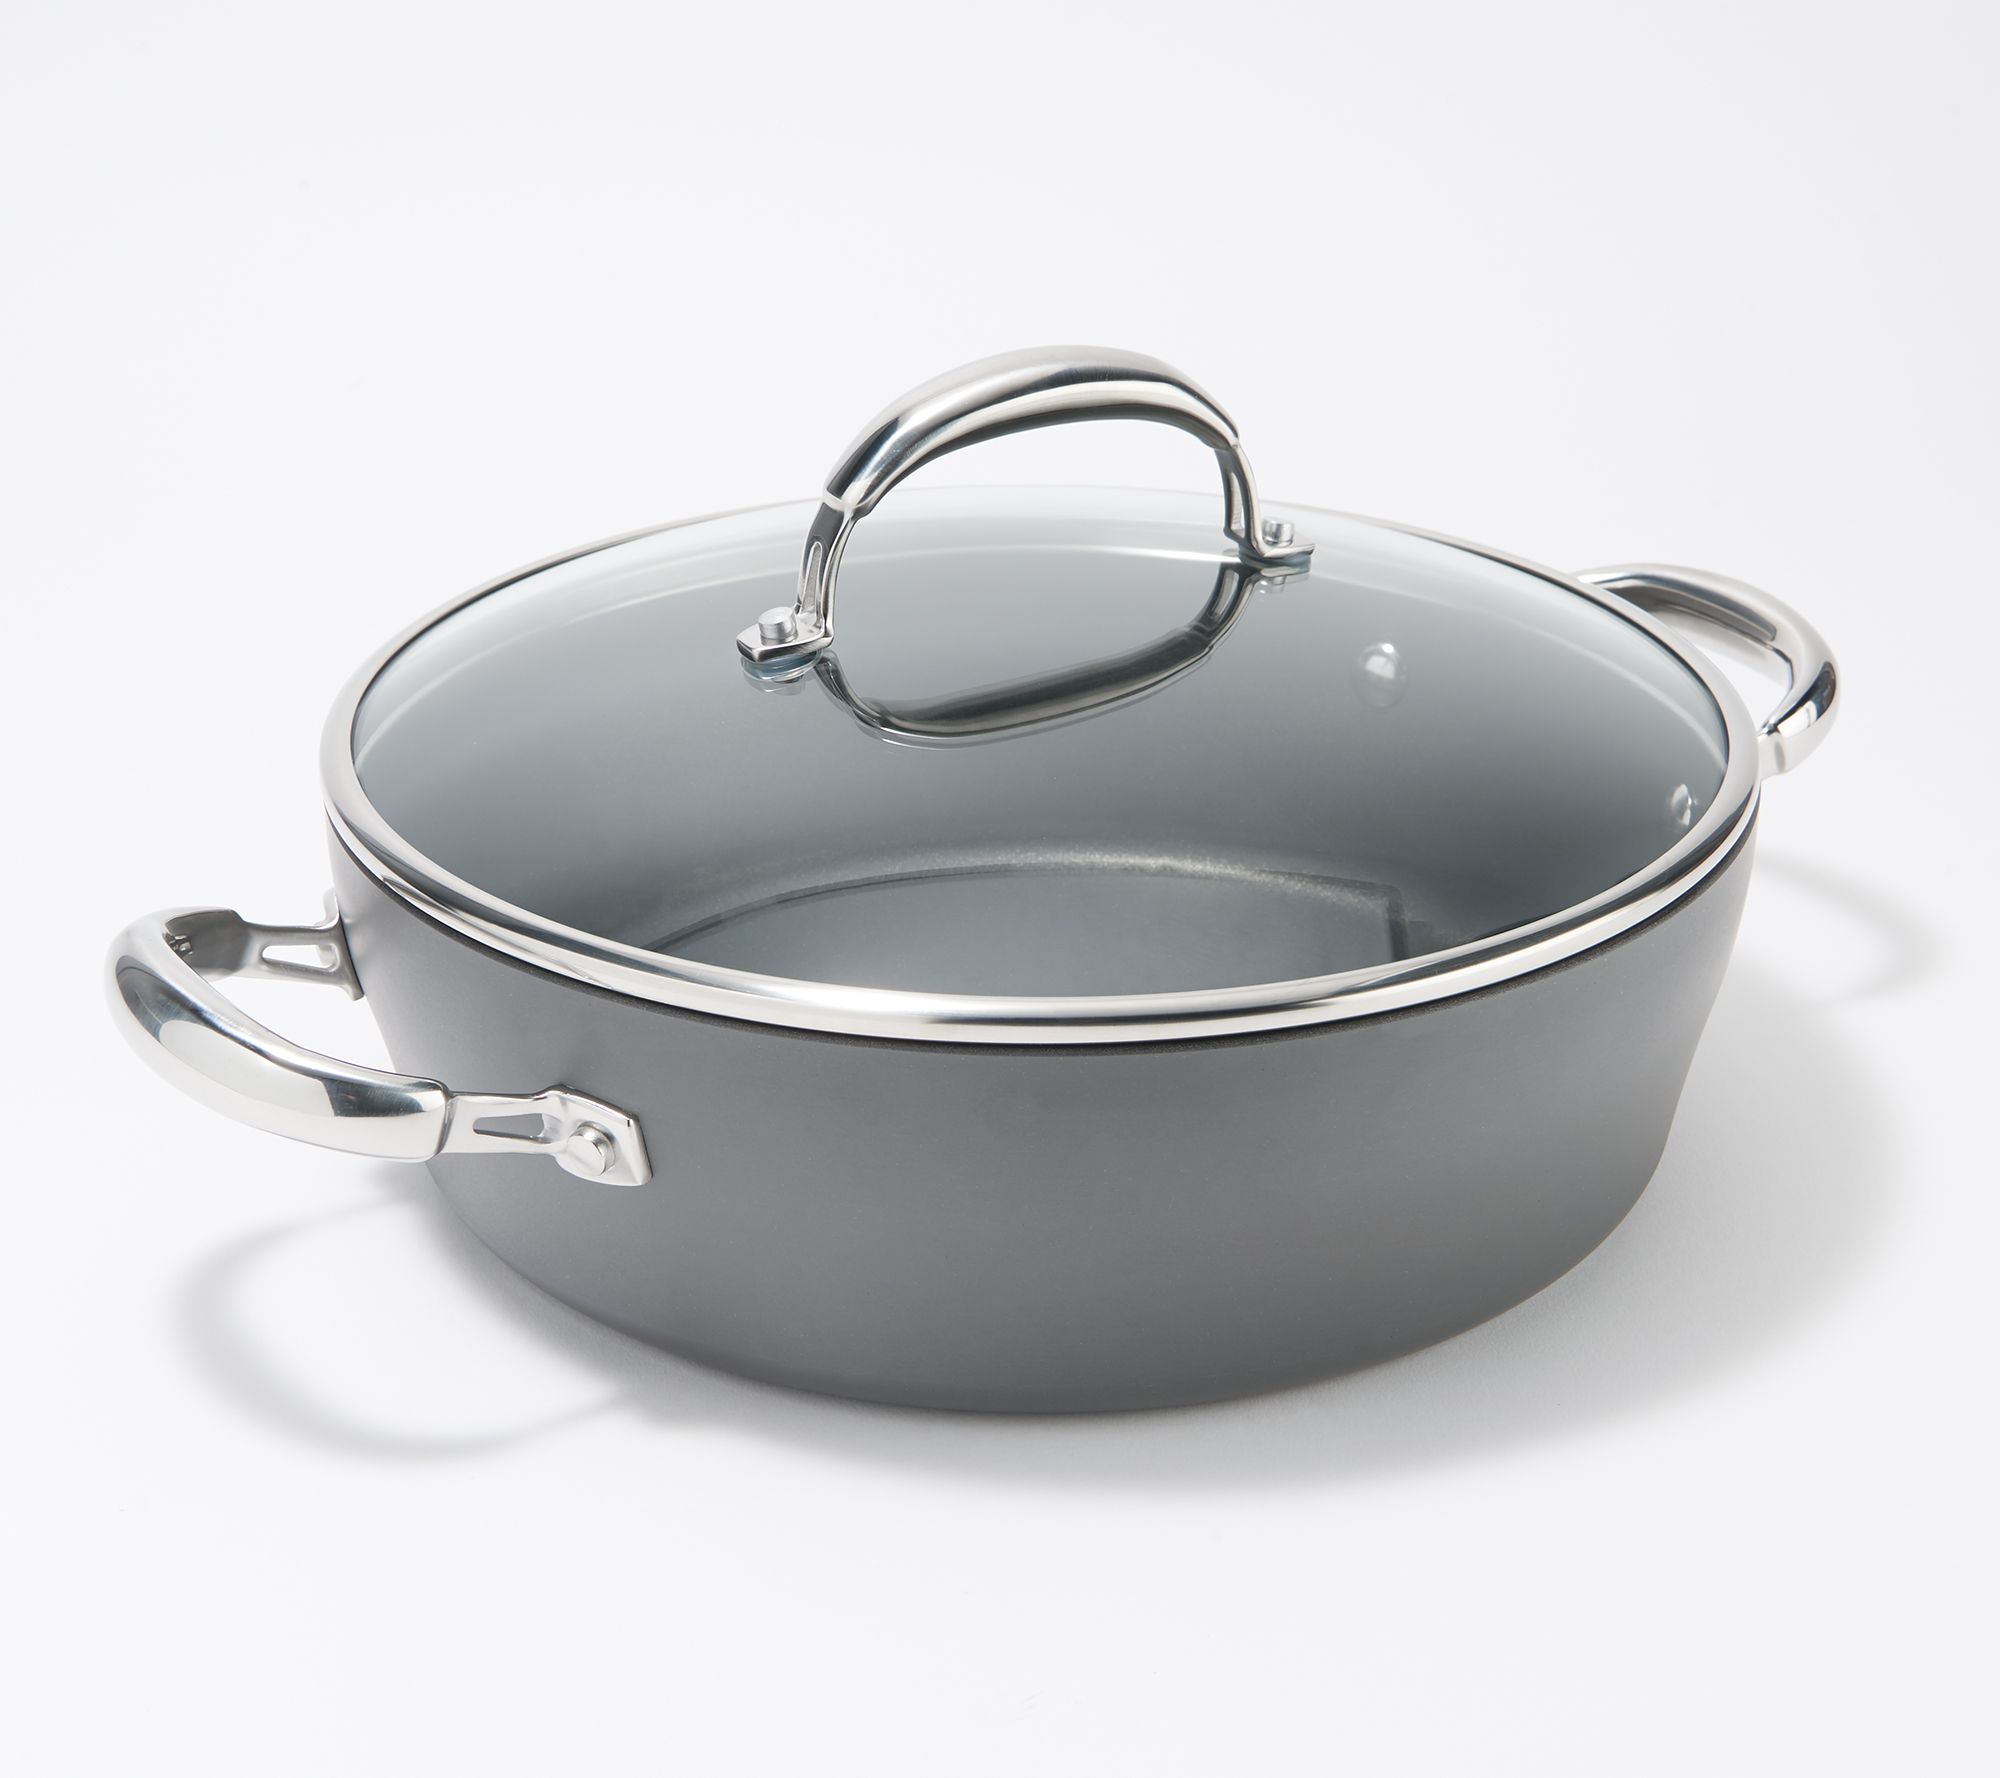 Cook's Essentials Hard Anodized 5-Quart Covered Sauteuse Pan 